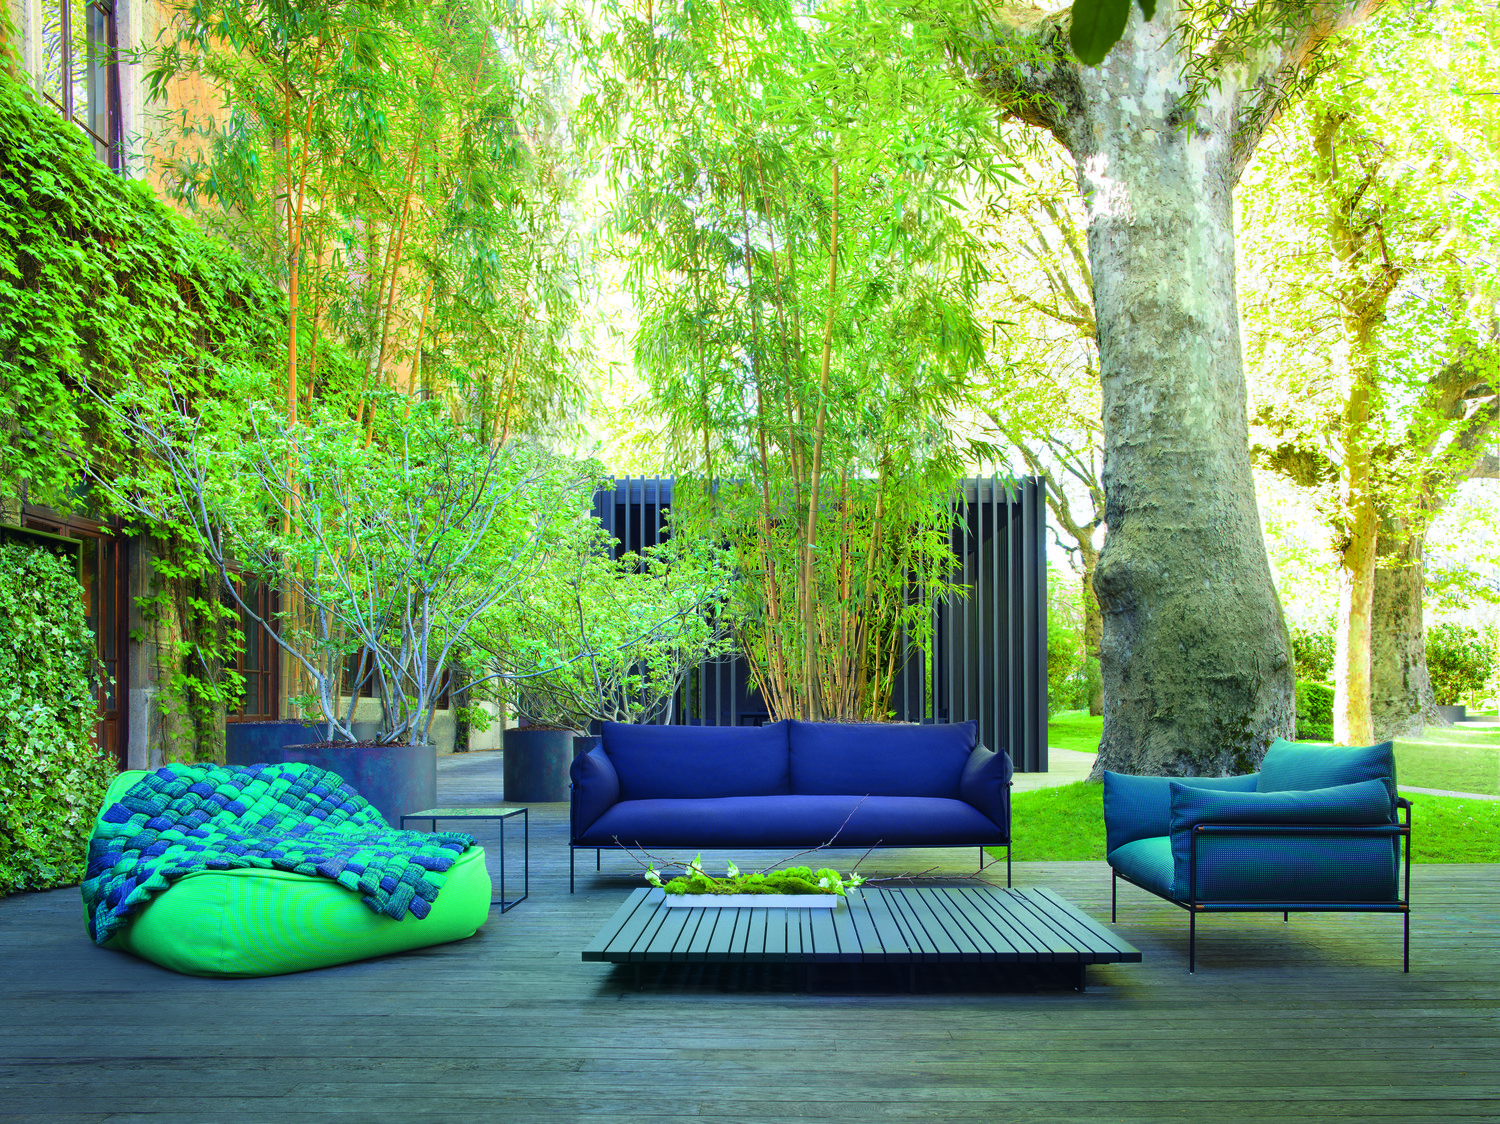 The Kabà series includes an armchair, a two-seater sofa, many sectional seating elements and a pouf. the structure is made of steel rods and plate and can be matt or gloss varnished in all the colors in the collection. Seat and back cushions and armrests are padded with Aerelle blue polyester fiber and stress-resistant polyurethane. The upholstery cover is removable and available in all the Paola Lenti’s exclusive signature outdoor fabrics. Kabà has been awarded the German Design Award 2017 in the Gardening and Outdoor Living category. © PAOLA LENTI SRL/SERGIO CHIMENTI